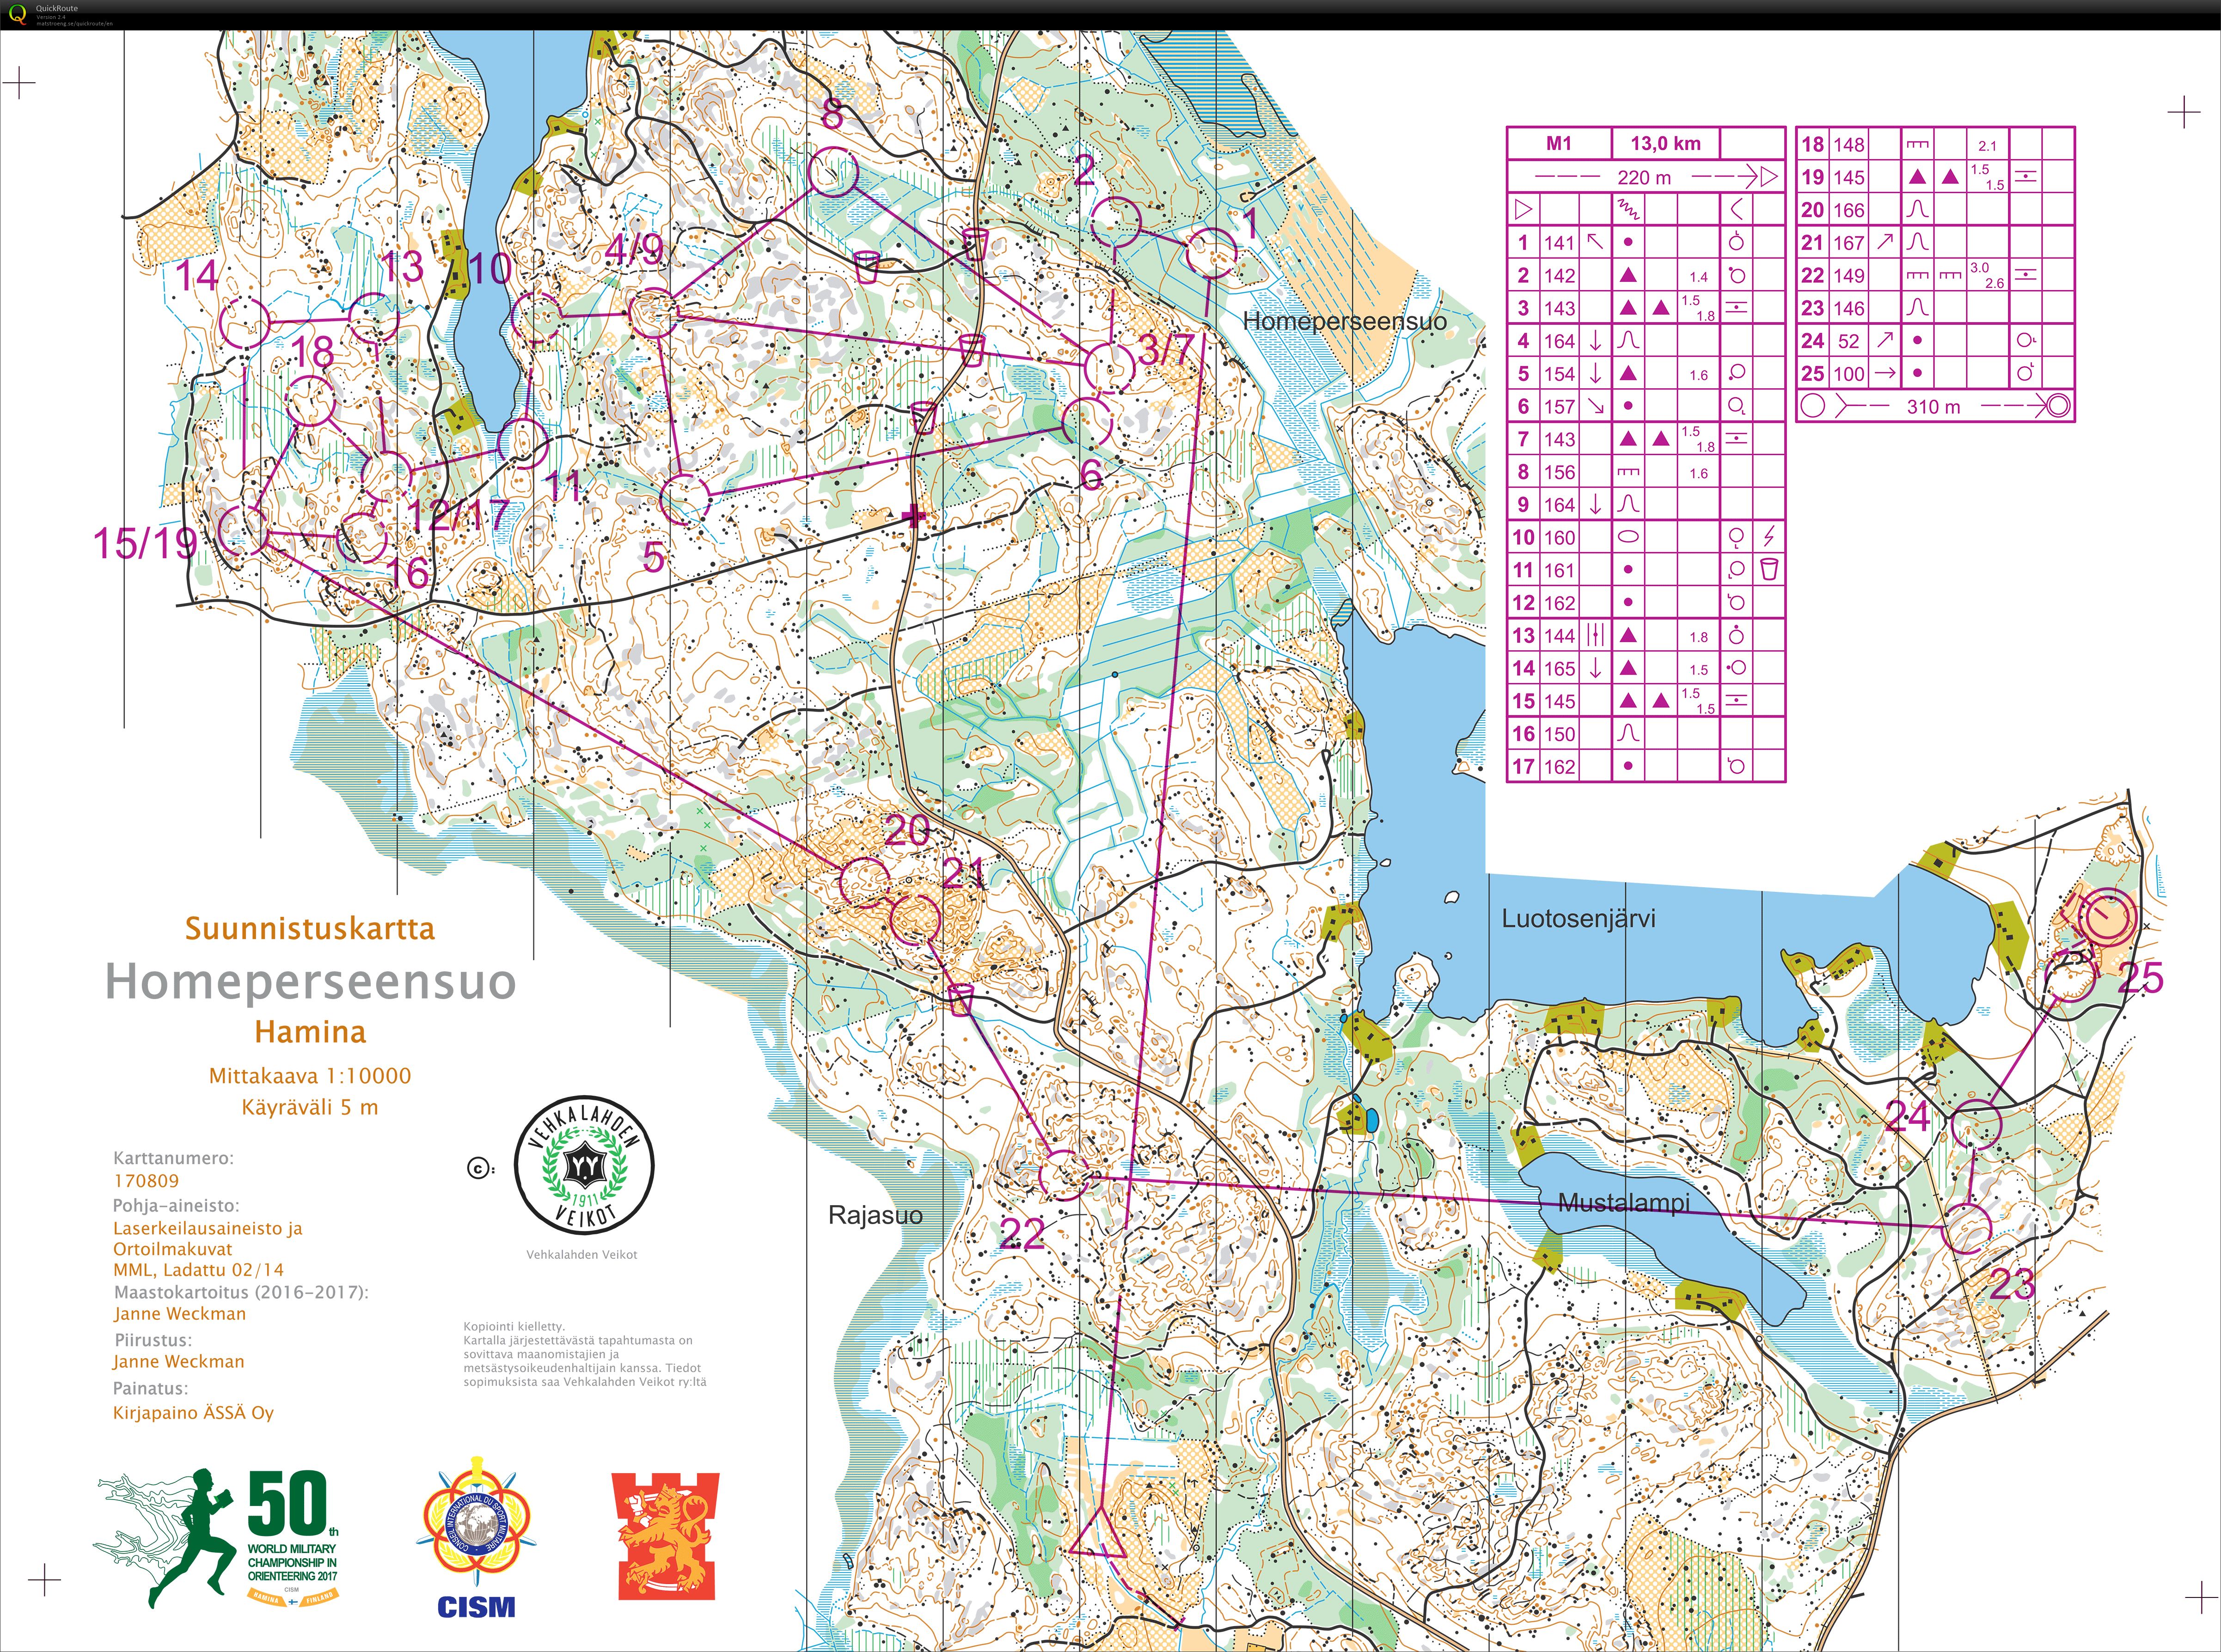 CISM World Military Orienteering Championships | Long (13/06/2017)